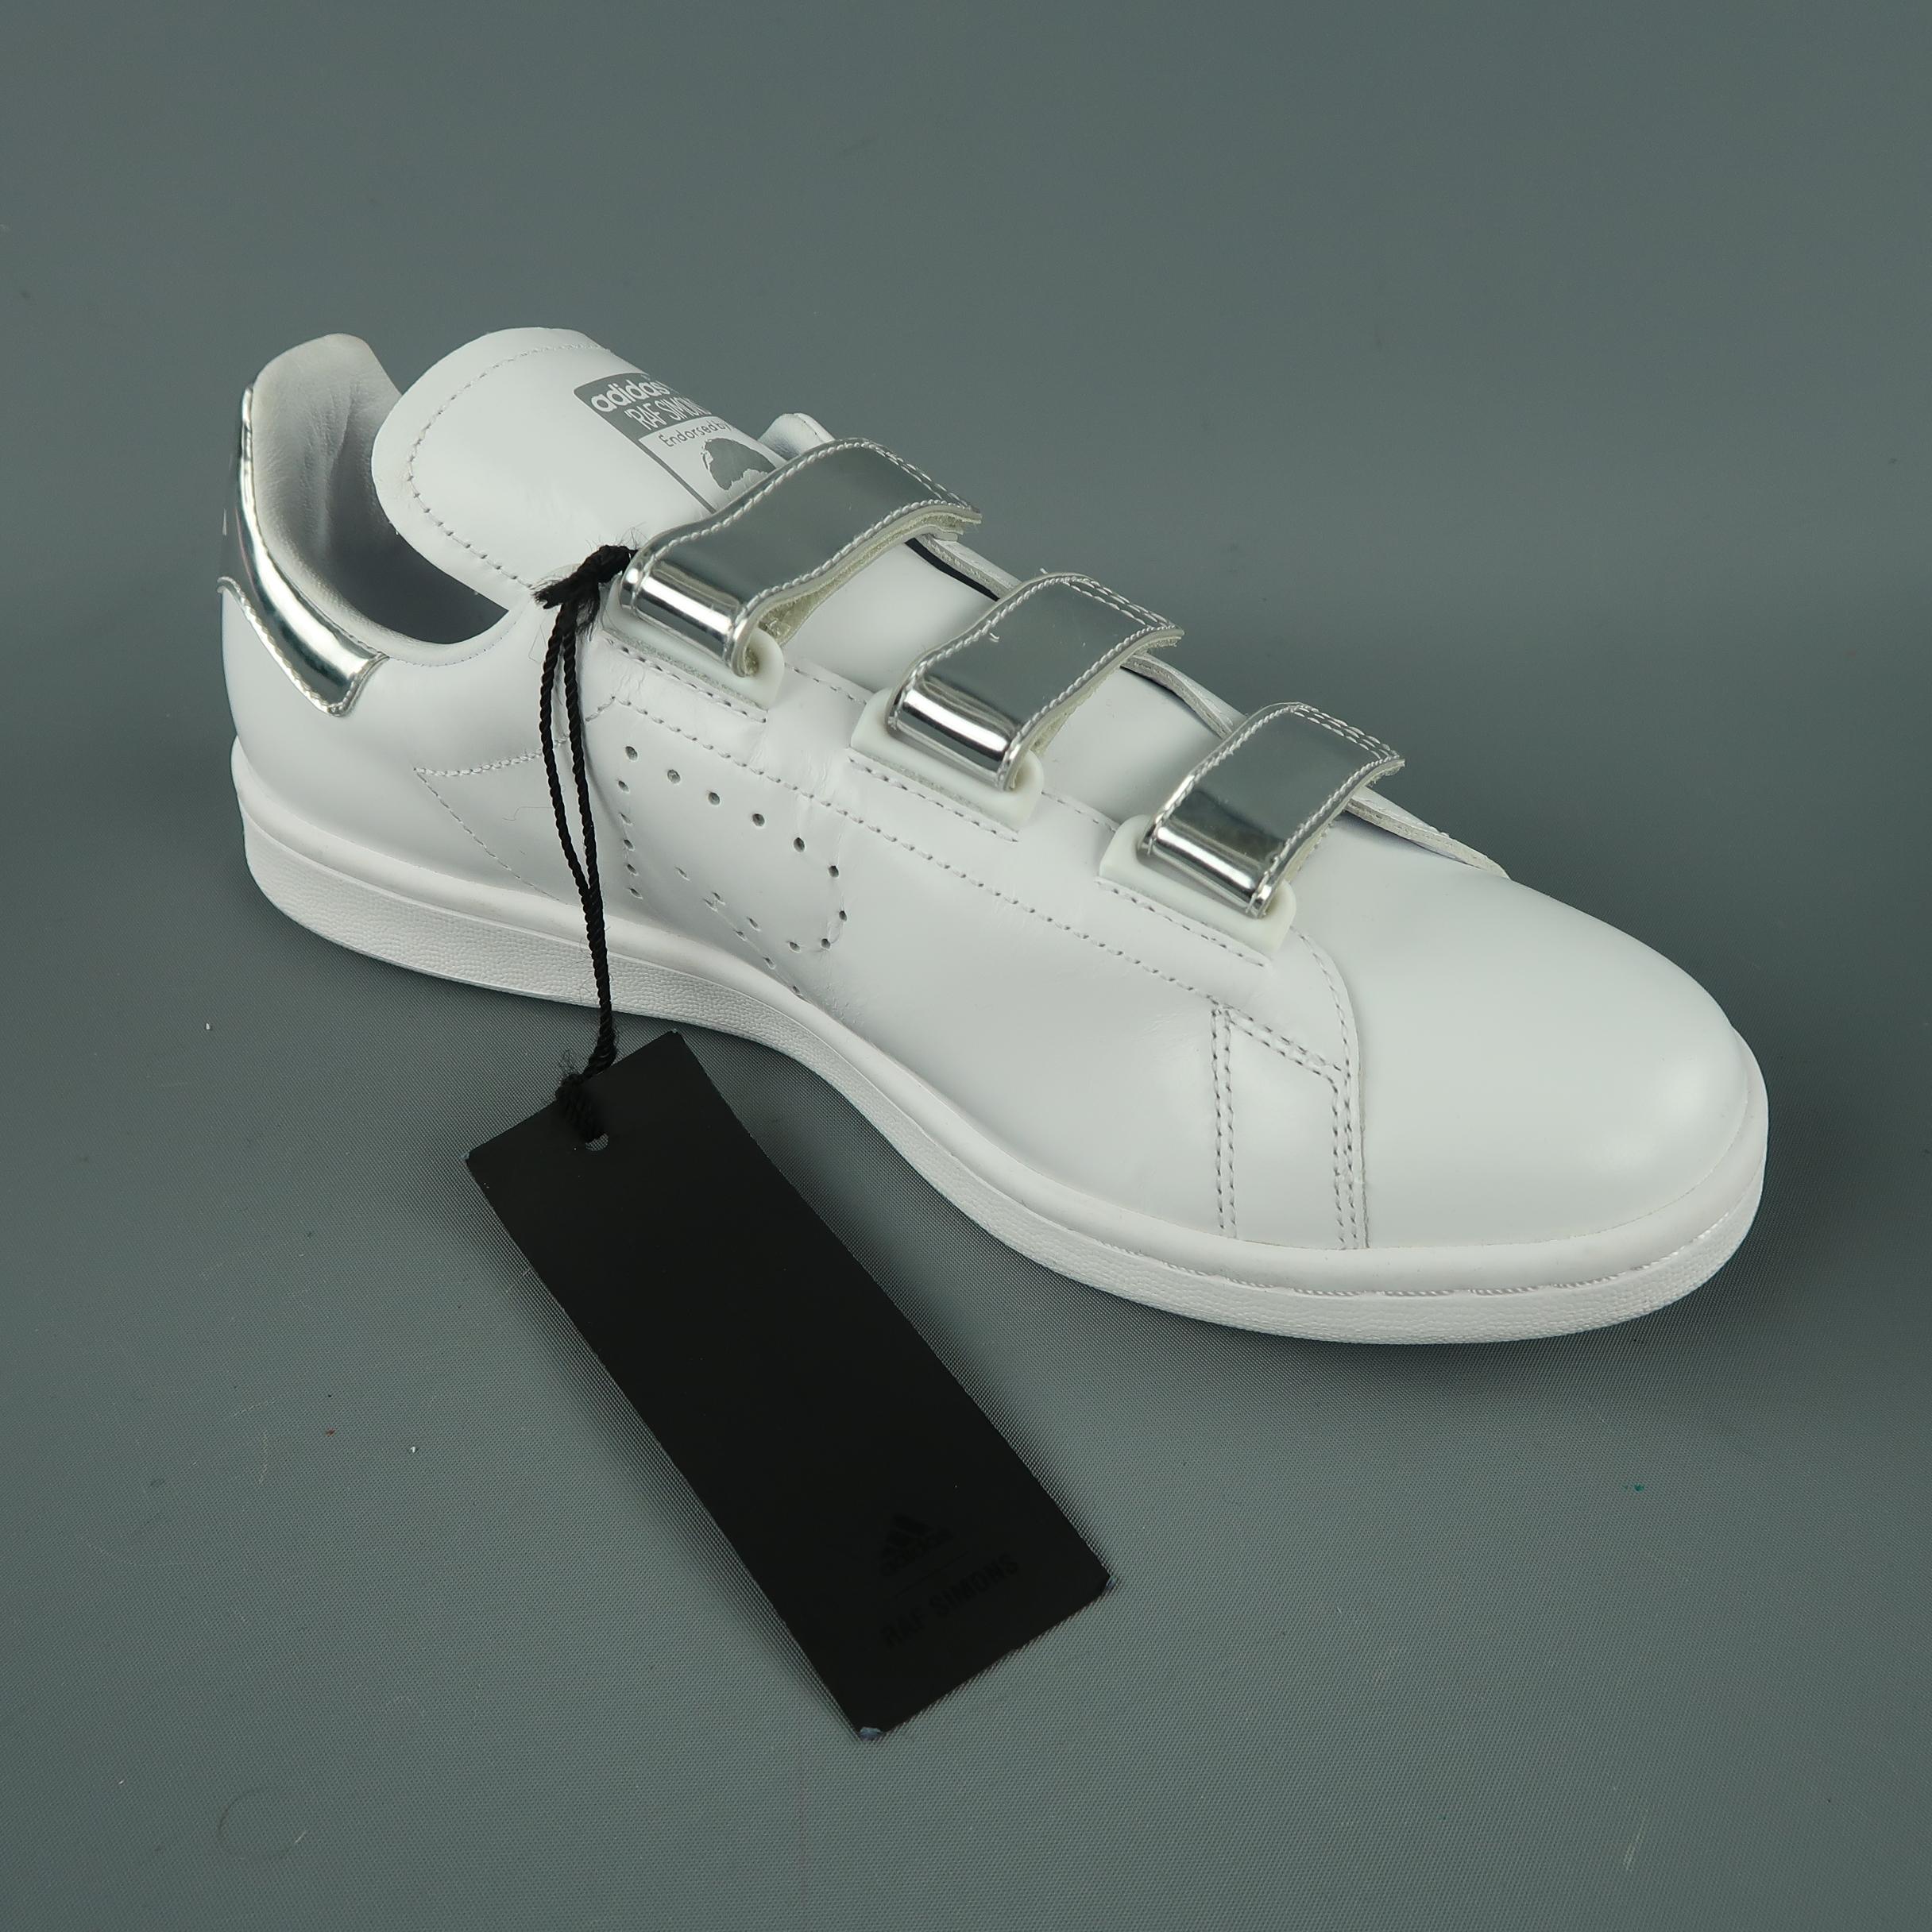 ADIDAS X RAF SIMONS Size 8.5 White Solid Leather Sneakers 5